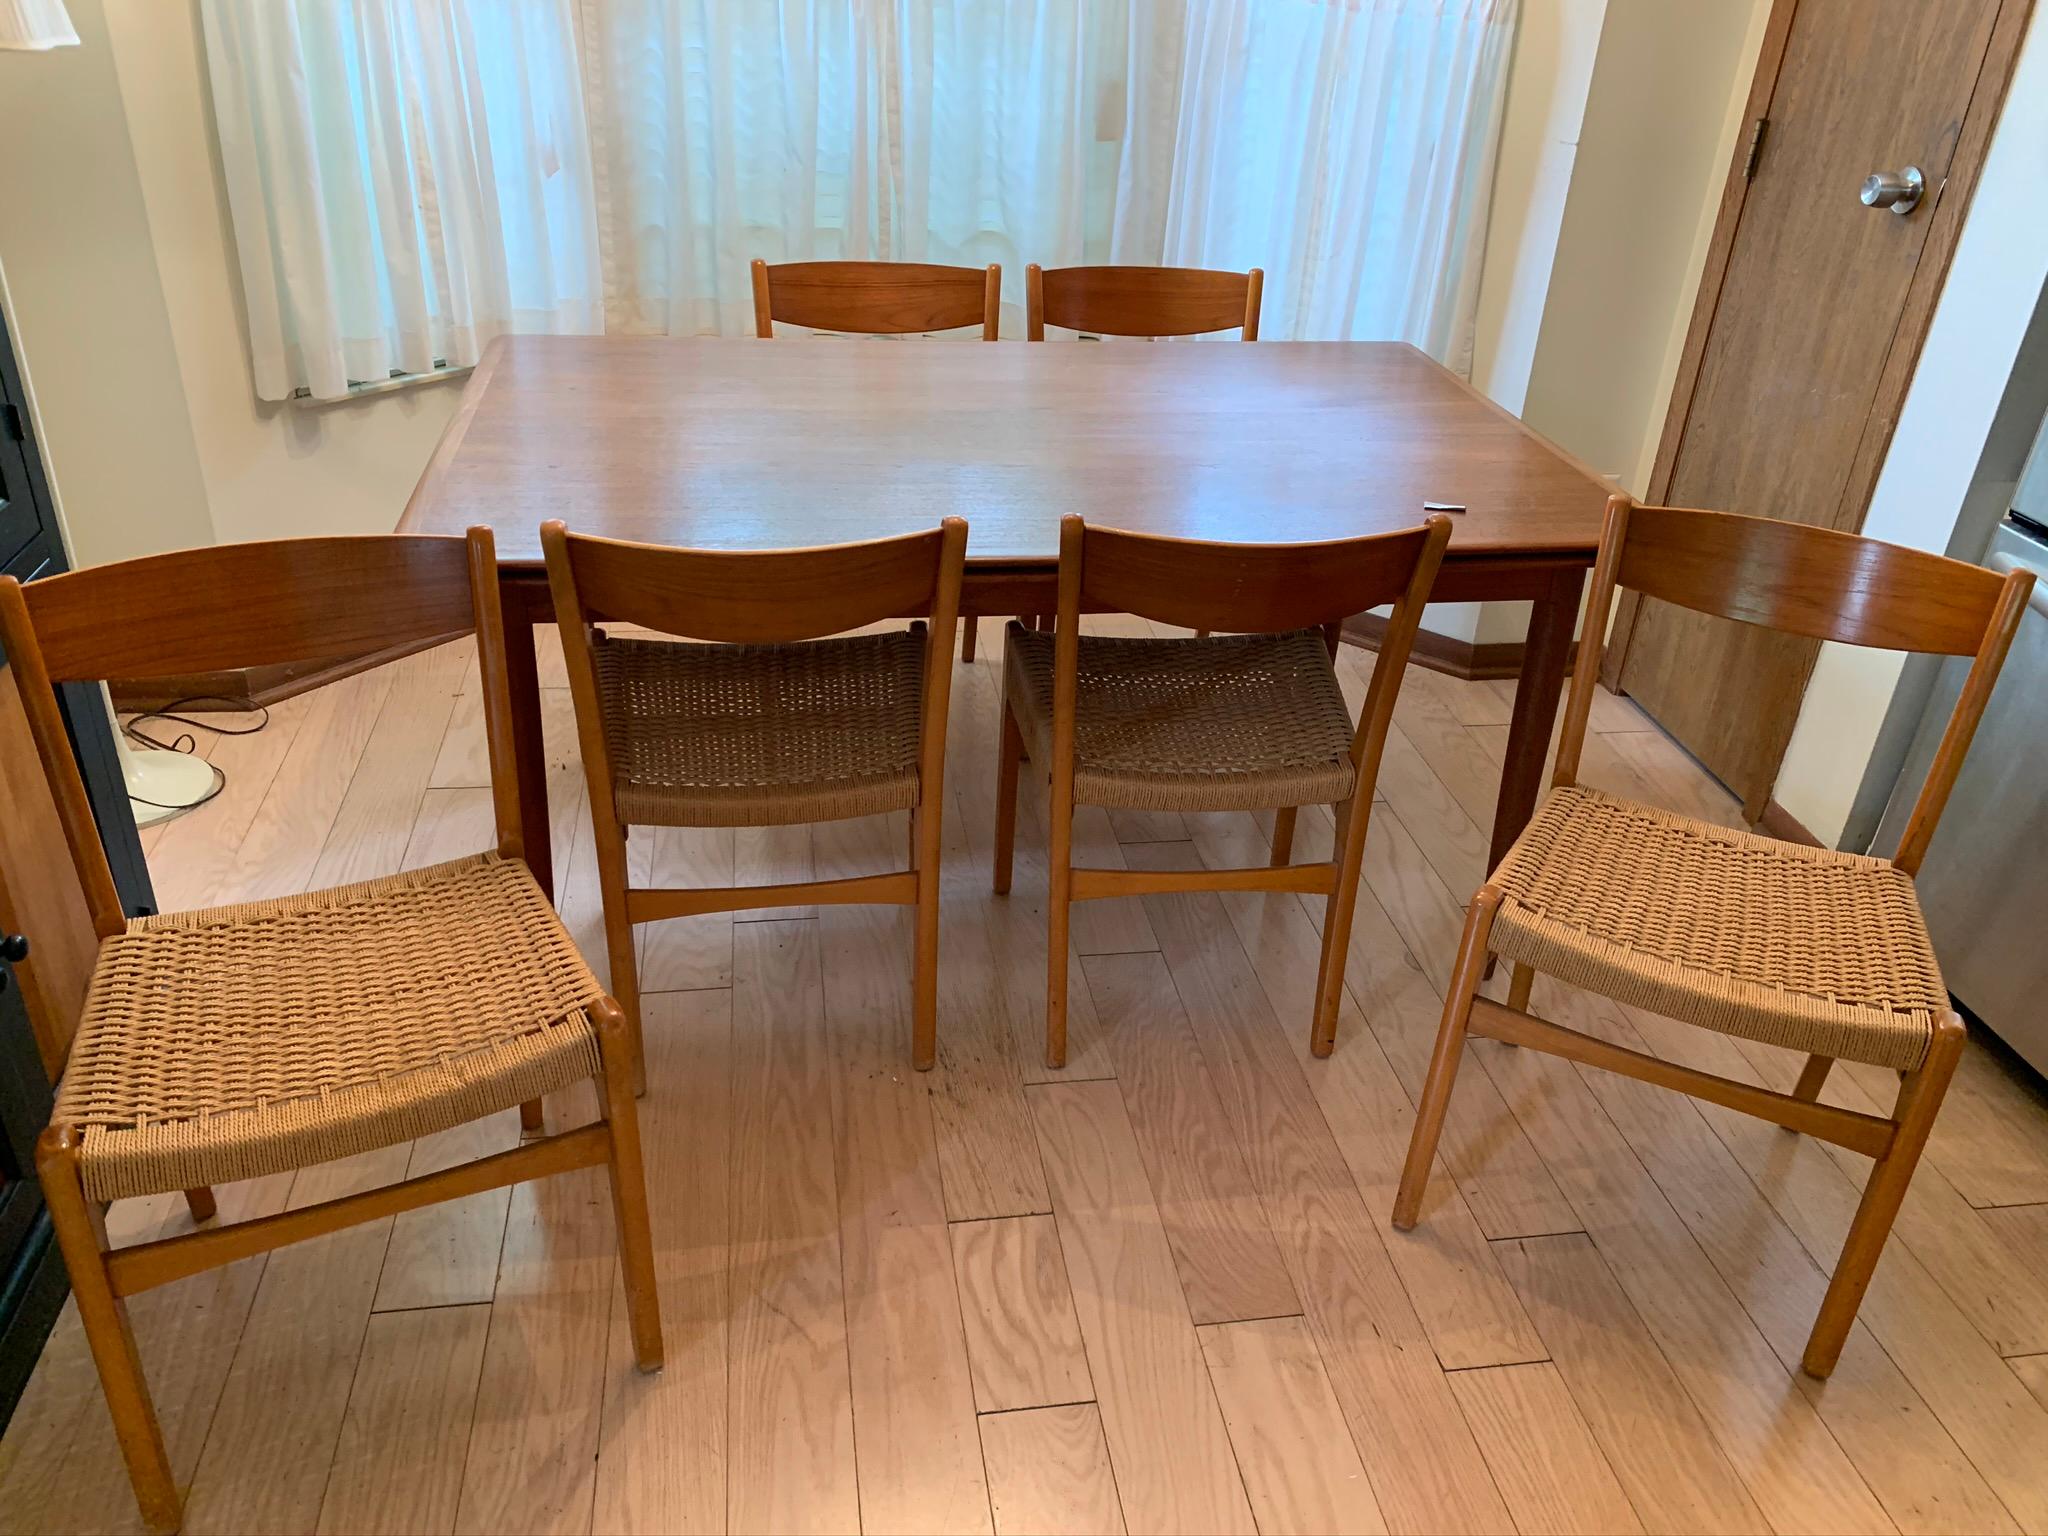 Great condition! Skovmand & Anderson Danish Kitchen table with 6 chairs